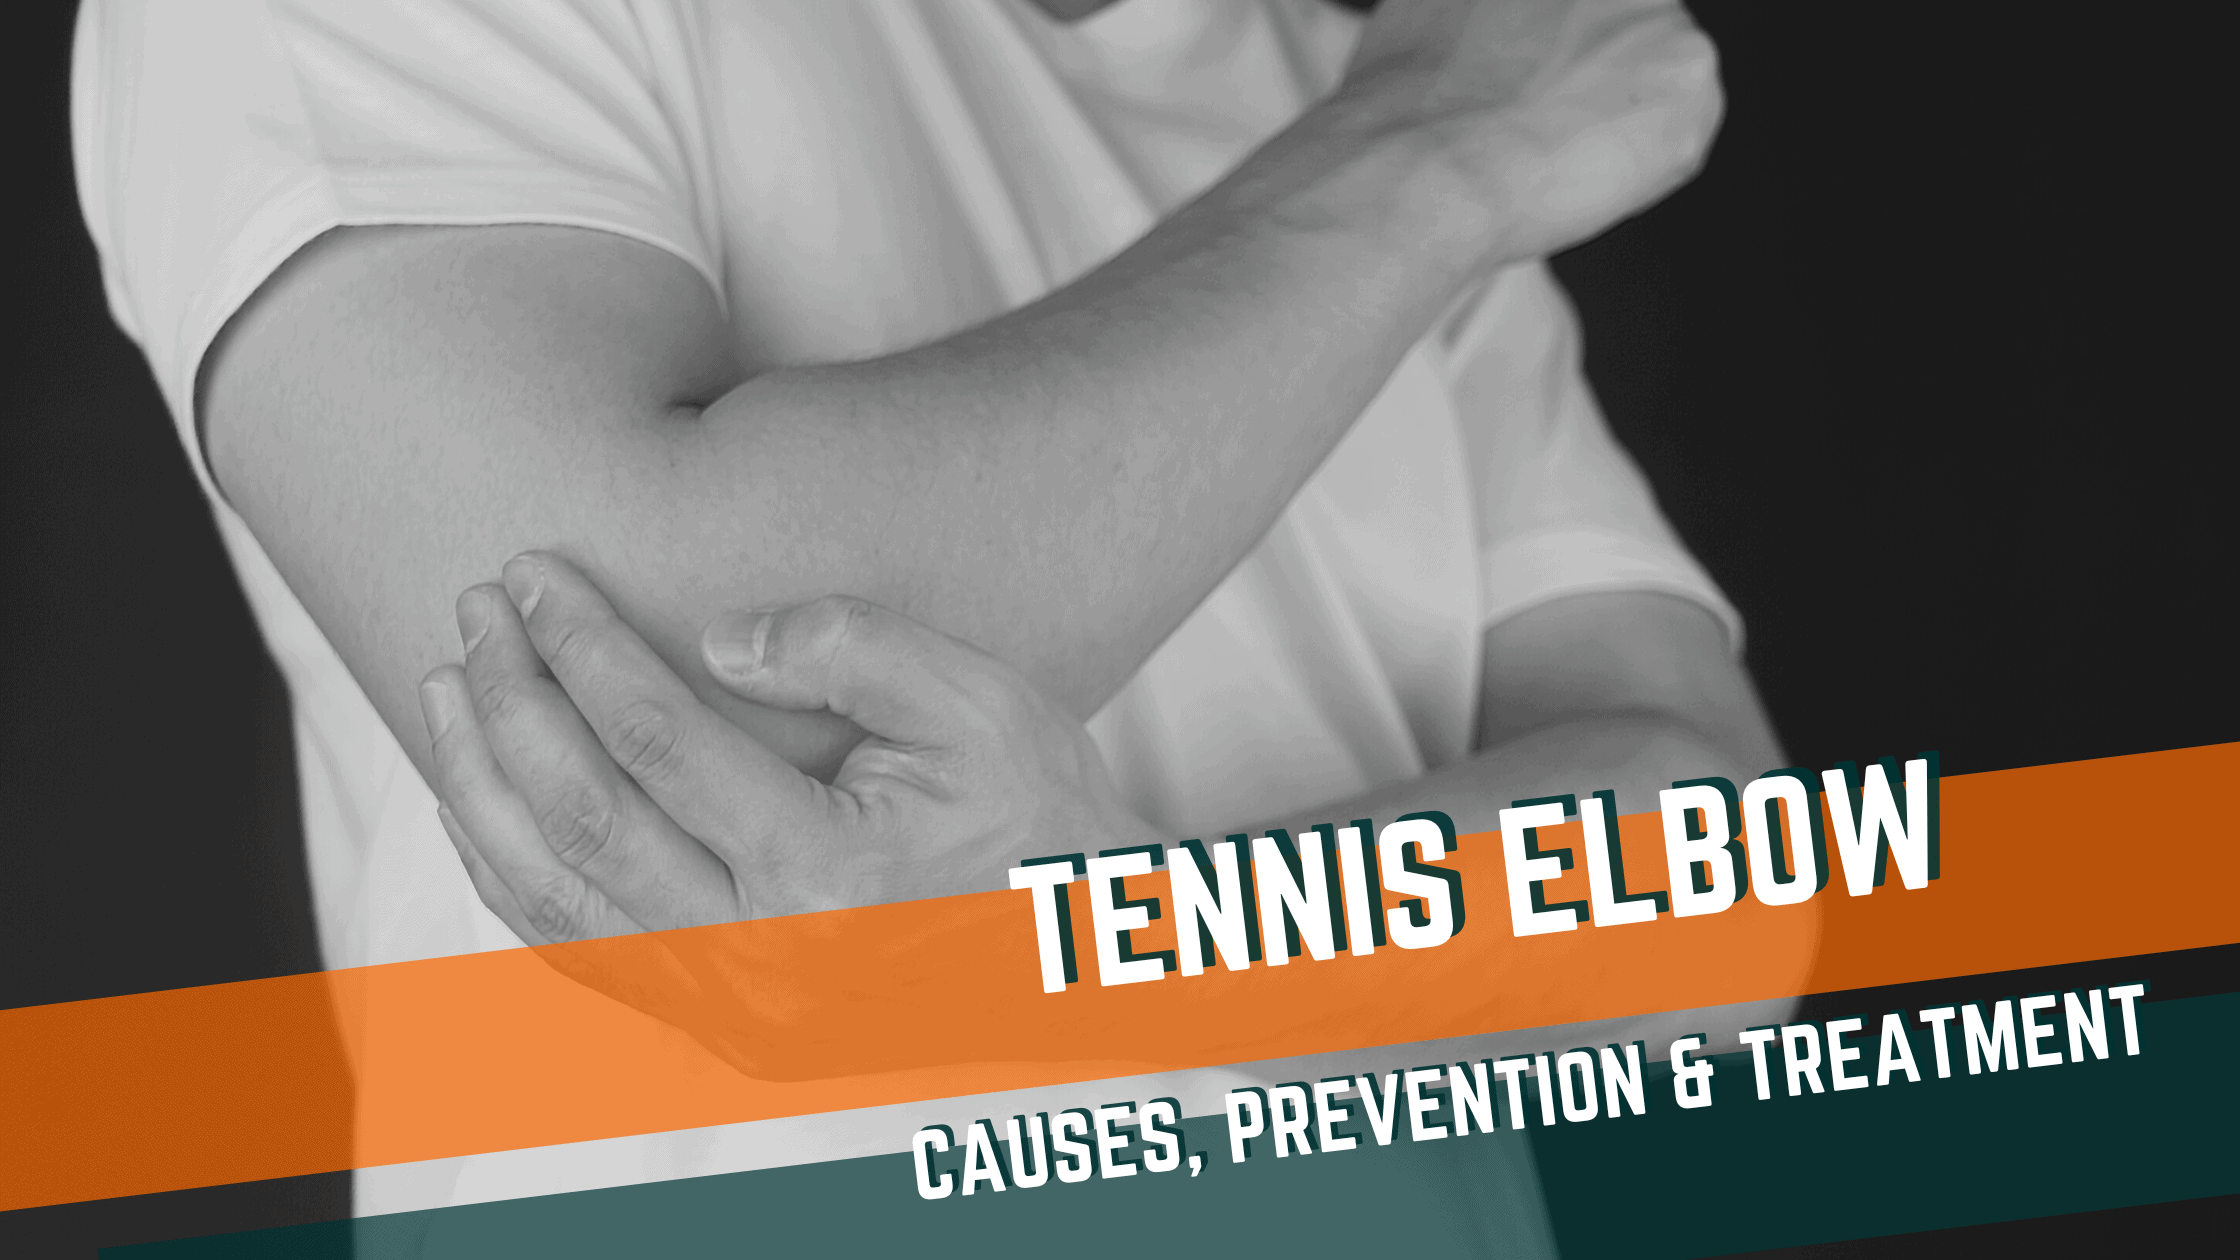 Featured image for “Tennis Elbow: Causes, Prevention & Treatment”